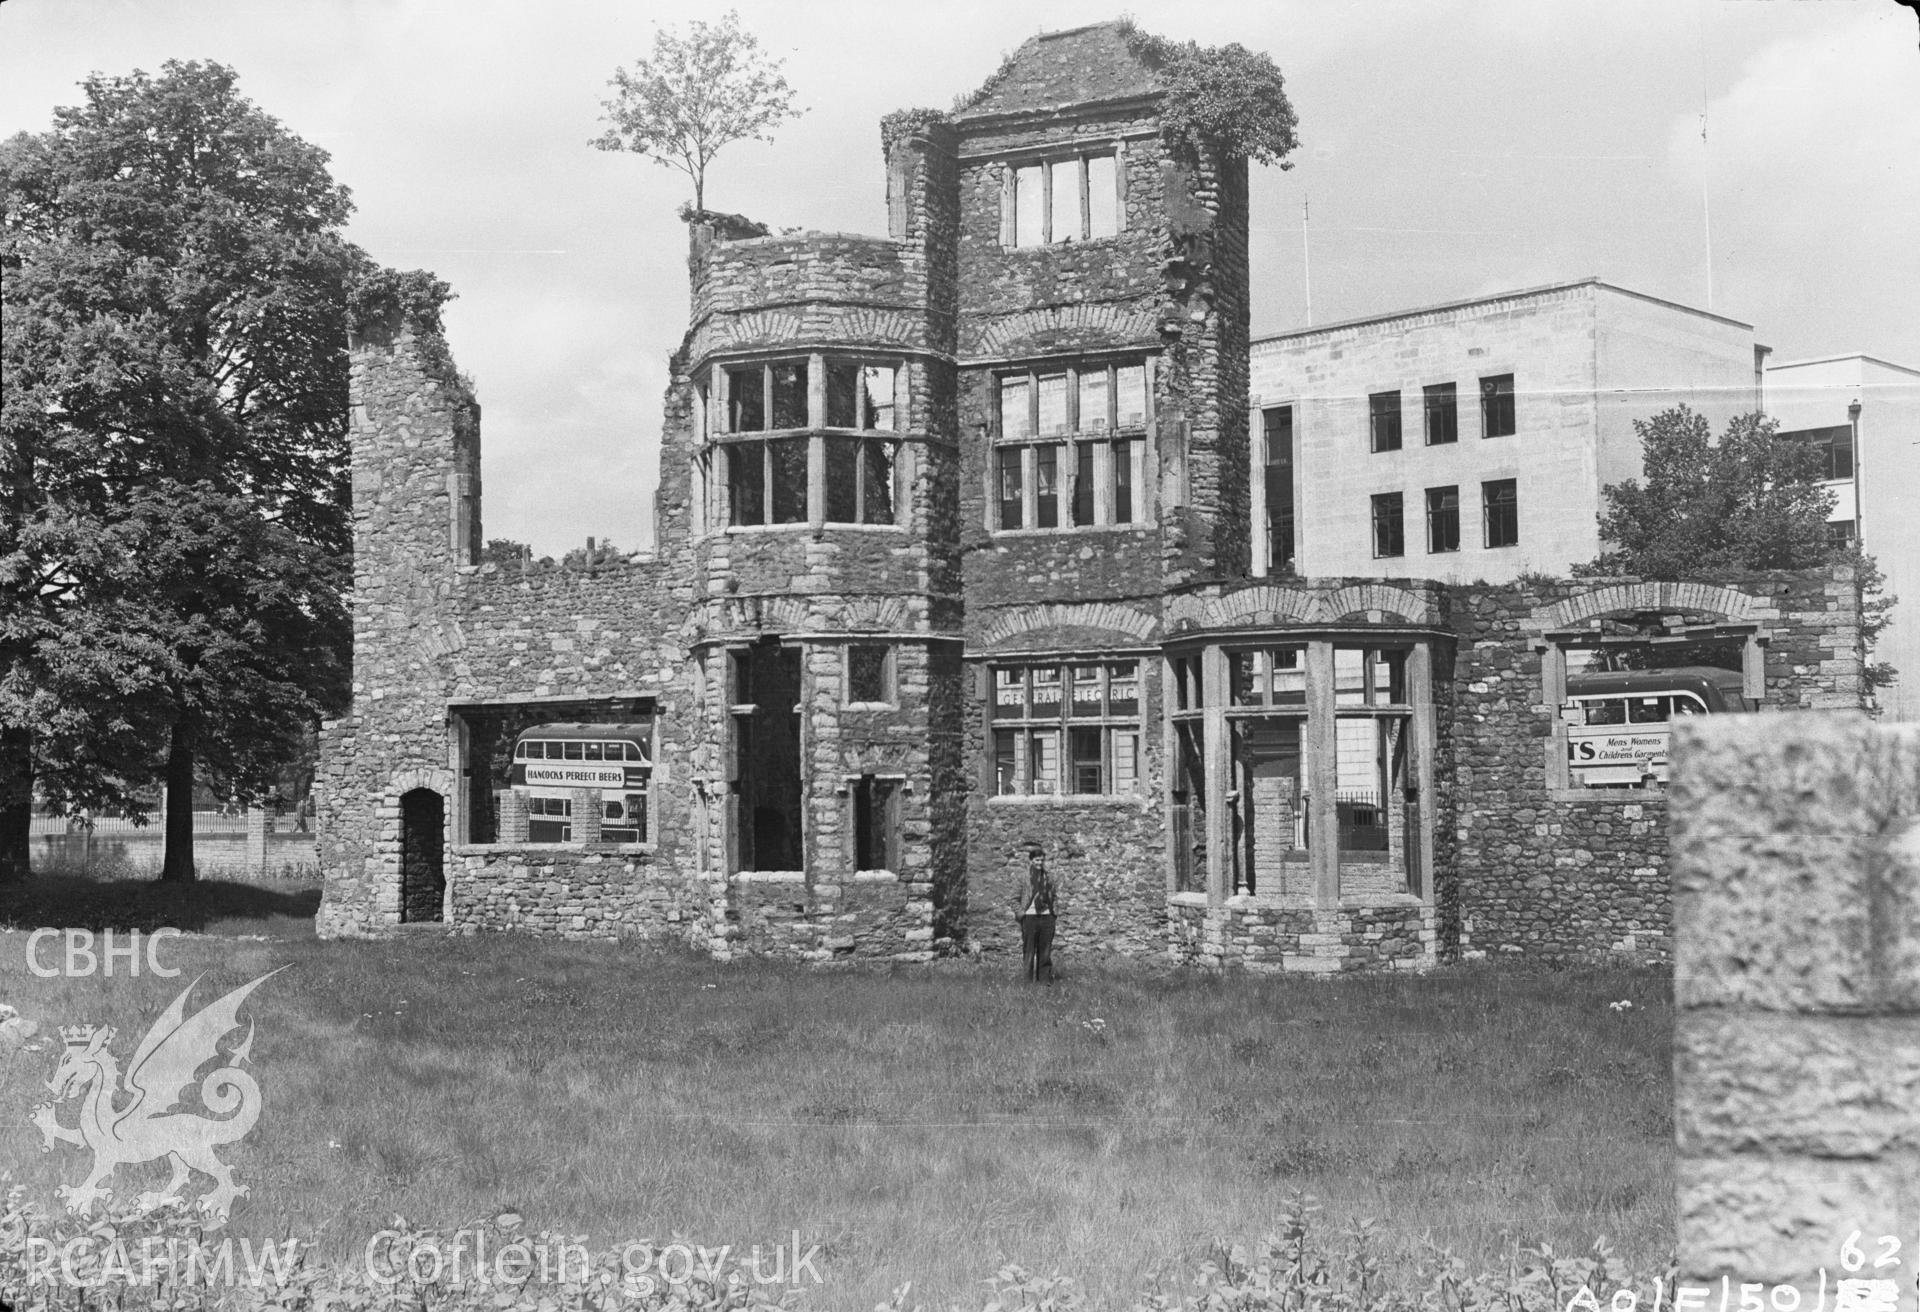 Digital copy of a nitrate negative showing remains of Herbert Mansion, Cardiff, taken by Ordnance Survey.